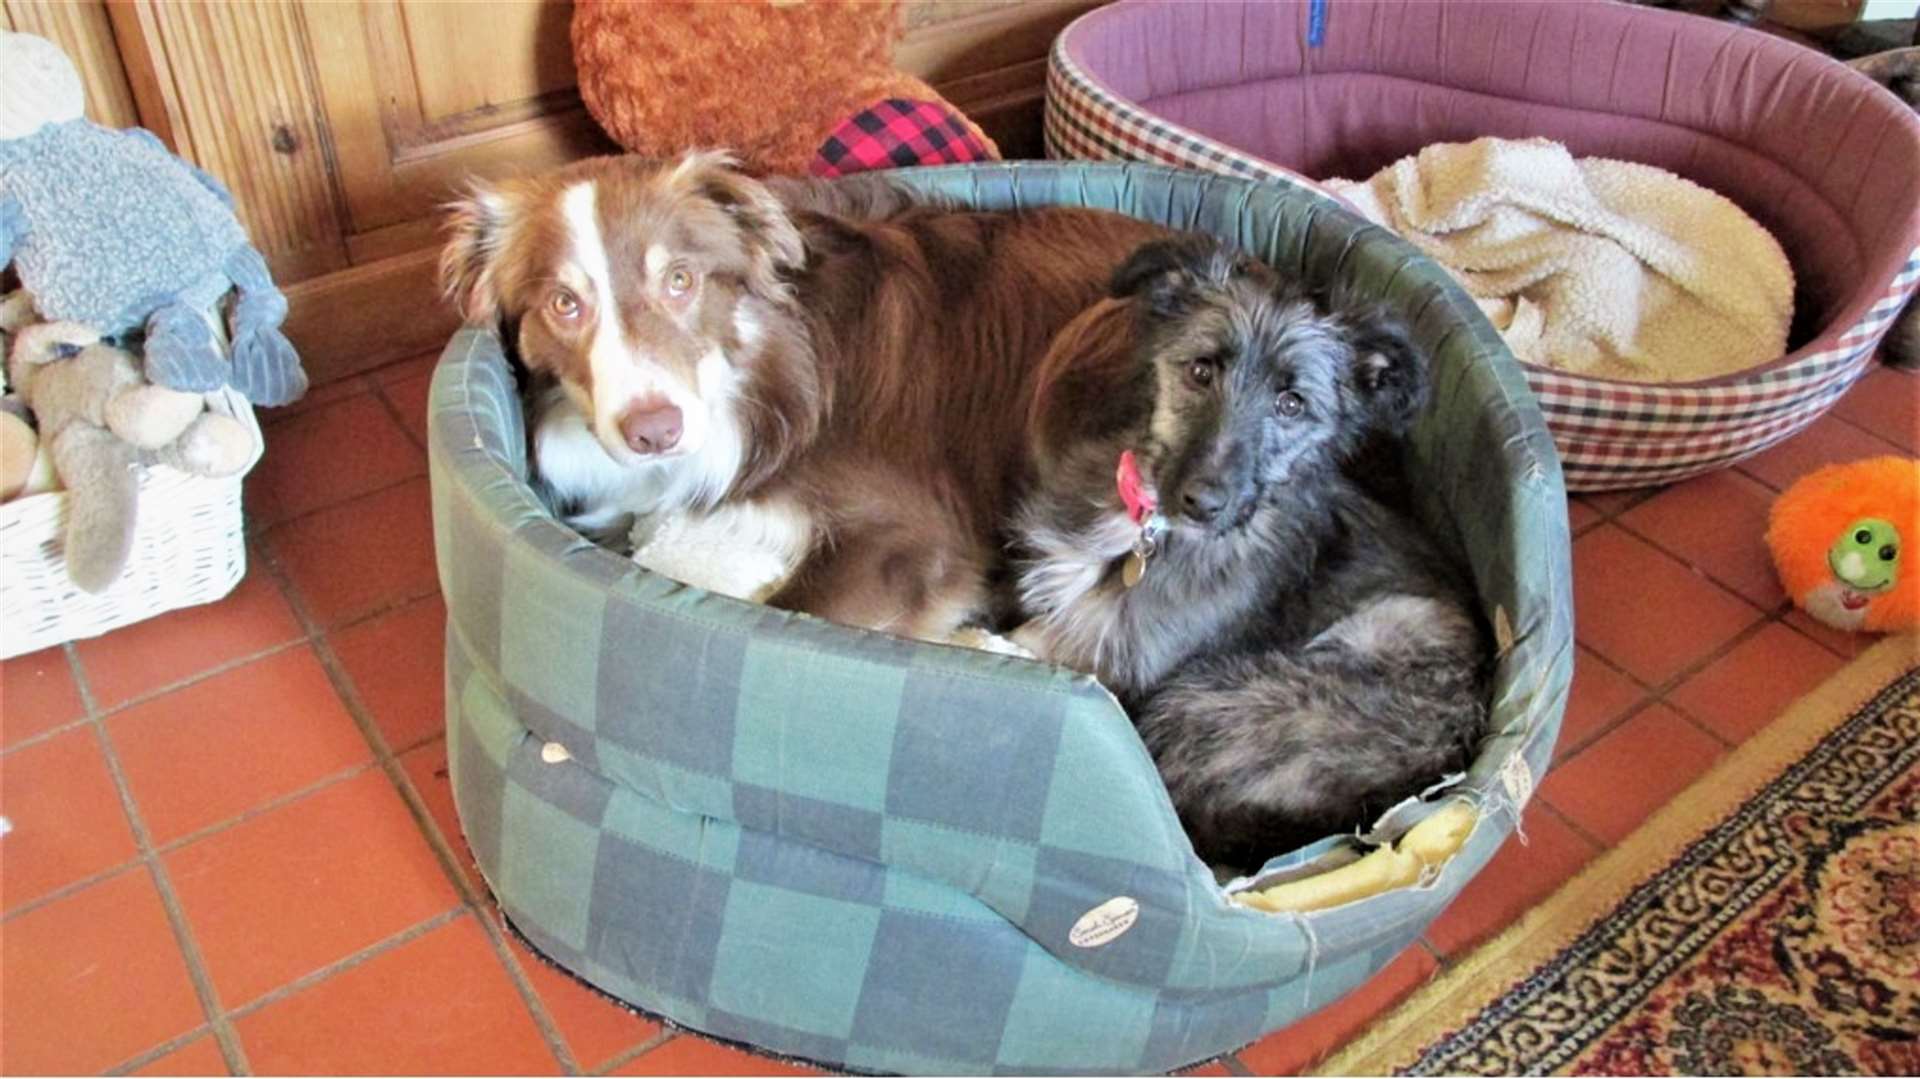 Bonnie (left) in her new home and making friends with her new pal Bozie. Bonnie, along with another dog Jack, had been neglected by their previous owner. Both dogs have now found loving homes.